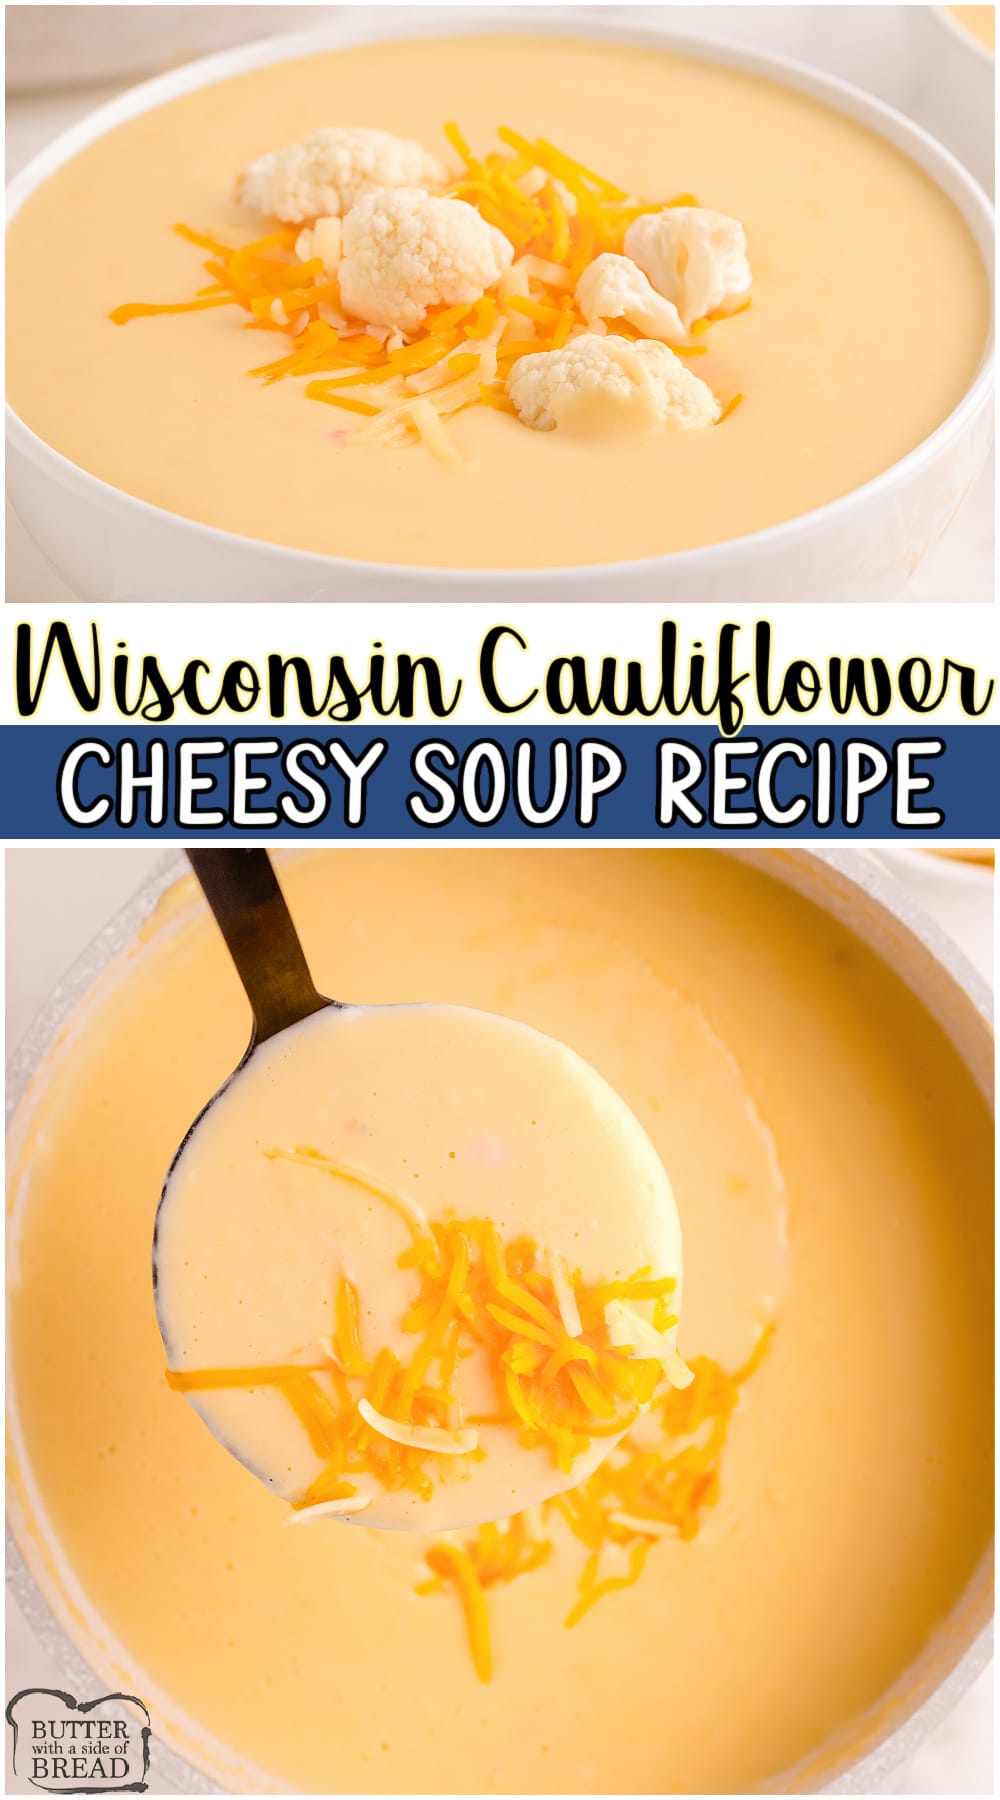 Wisconsin Cauliflower soup made with a head of cauliflower, broth, seasonings & cheese! Creamy low cal soup that's easy to make & goes well with grilled cheese. No one guesses it's made with cauliflower! #soup #cheese #cauliflower #easyrecipe from BUTTER WITH A SIDE OF BREAD